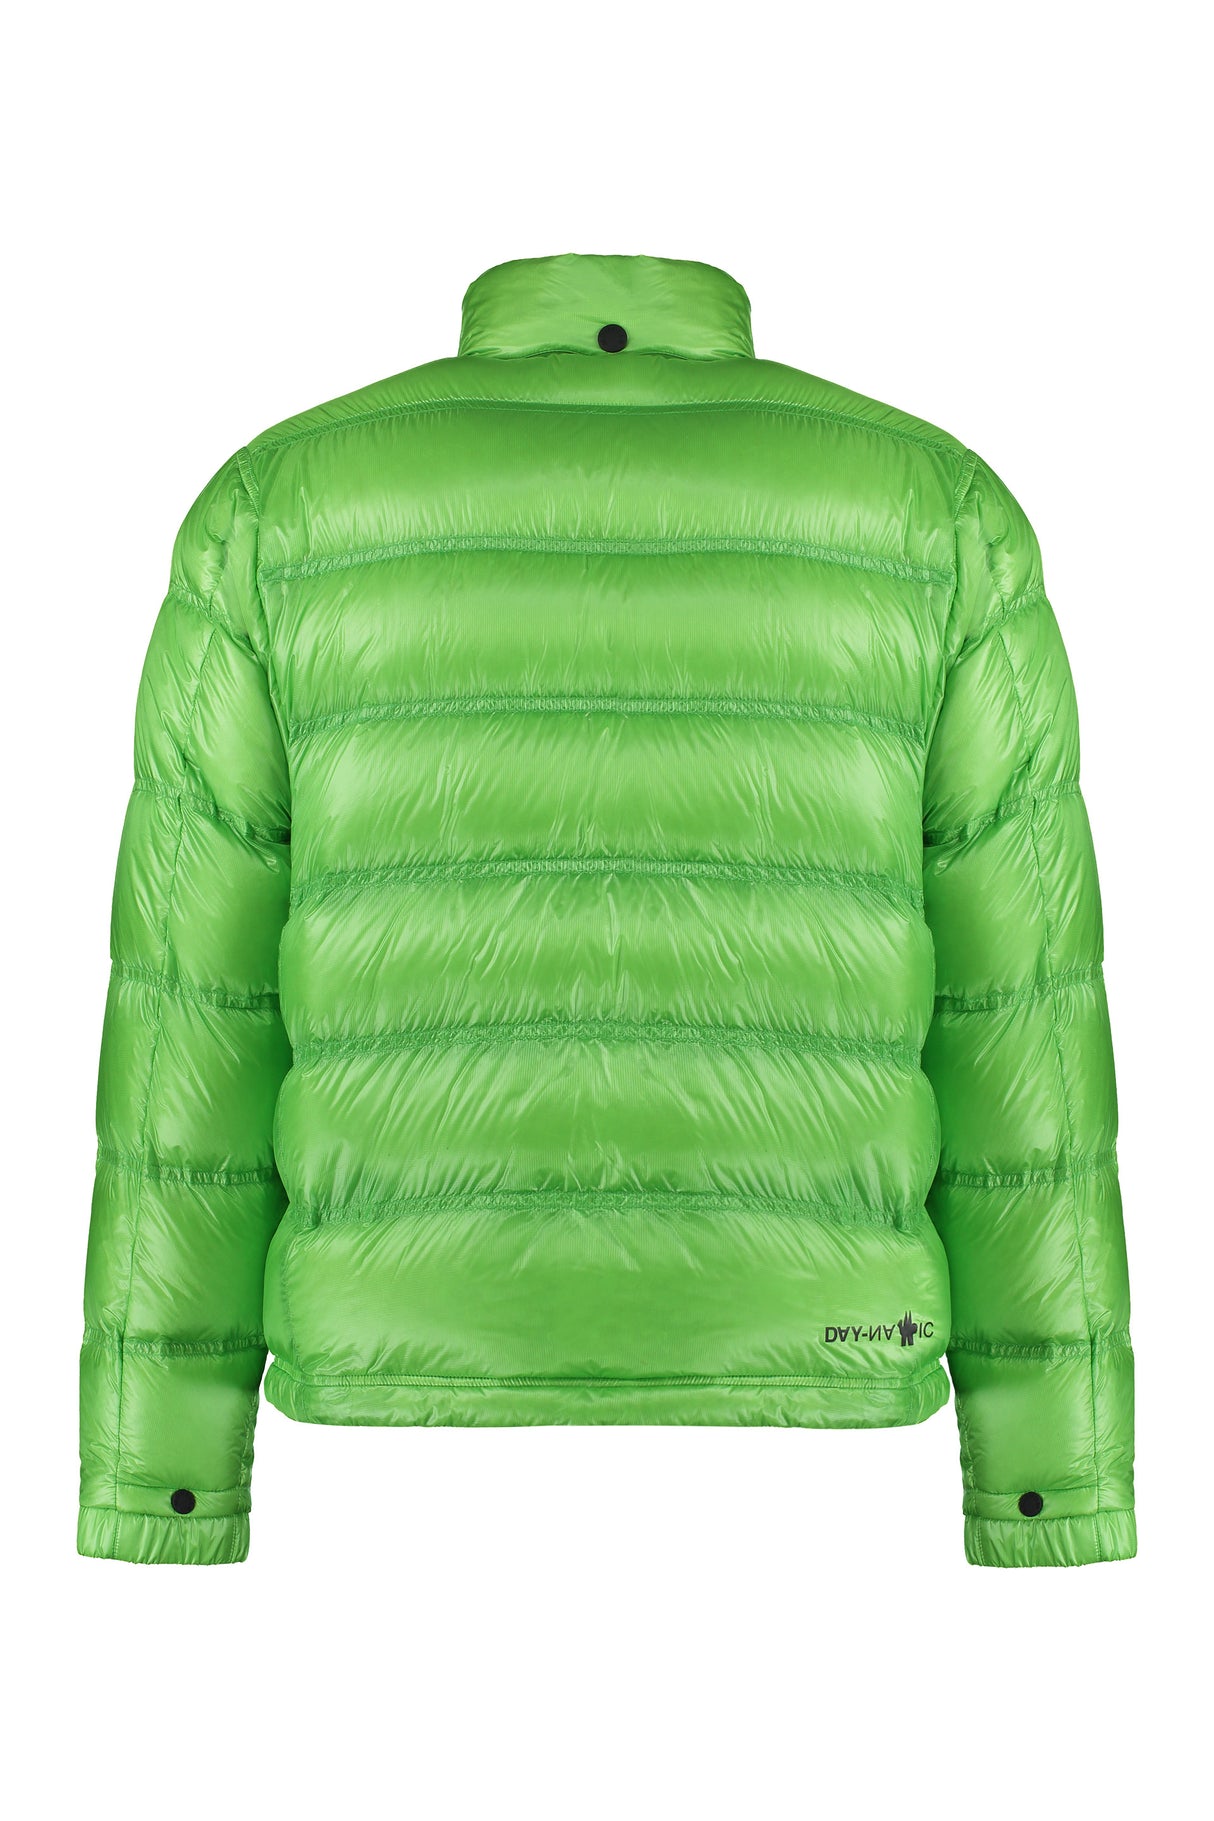 MONCLER GRENOBLE Men's Green Down Jacket with Removable Gloves and Adjustable Hem - FW23 Collection